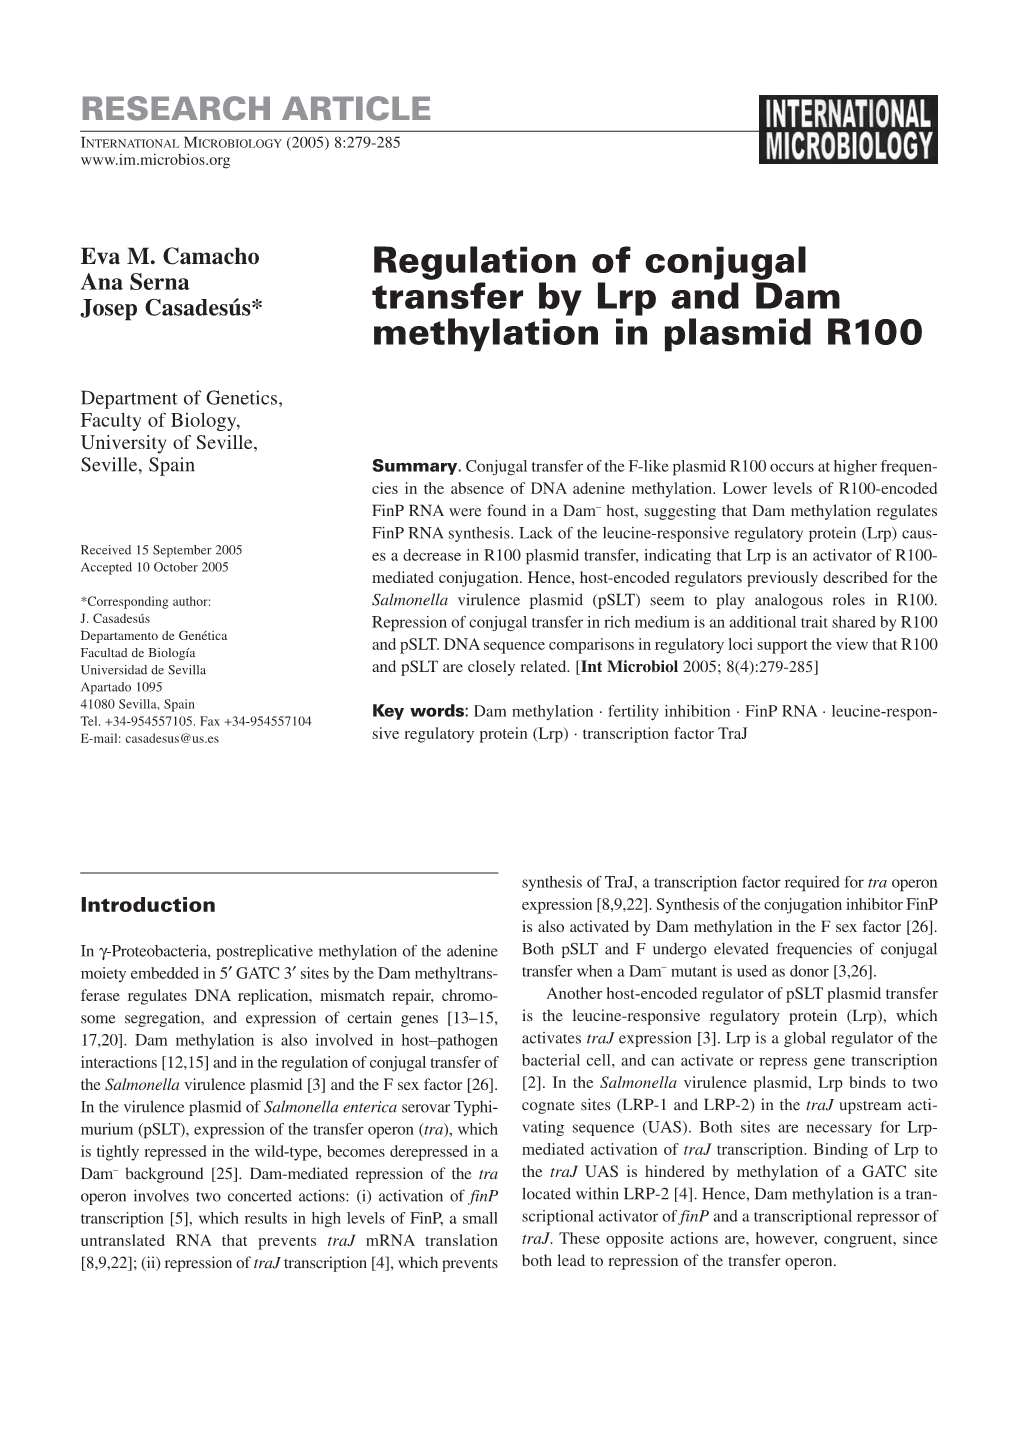 Regulation of Conjugal Transfer by Lrp and Dam Methylation in Plasmid R100